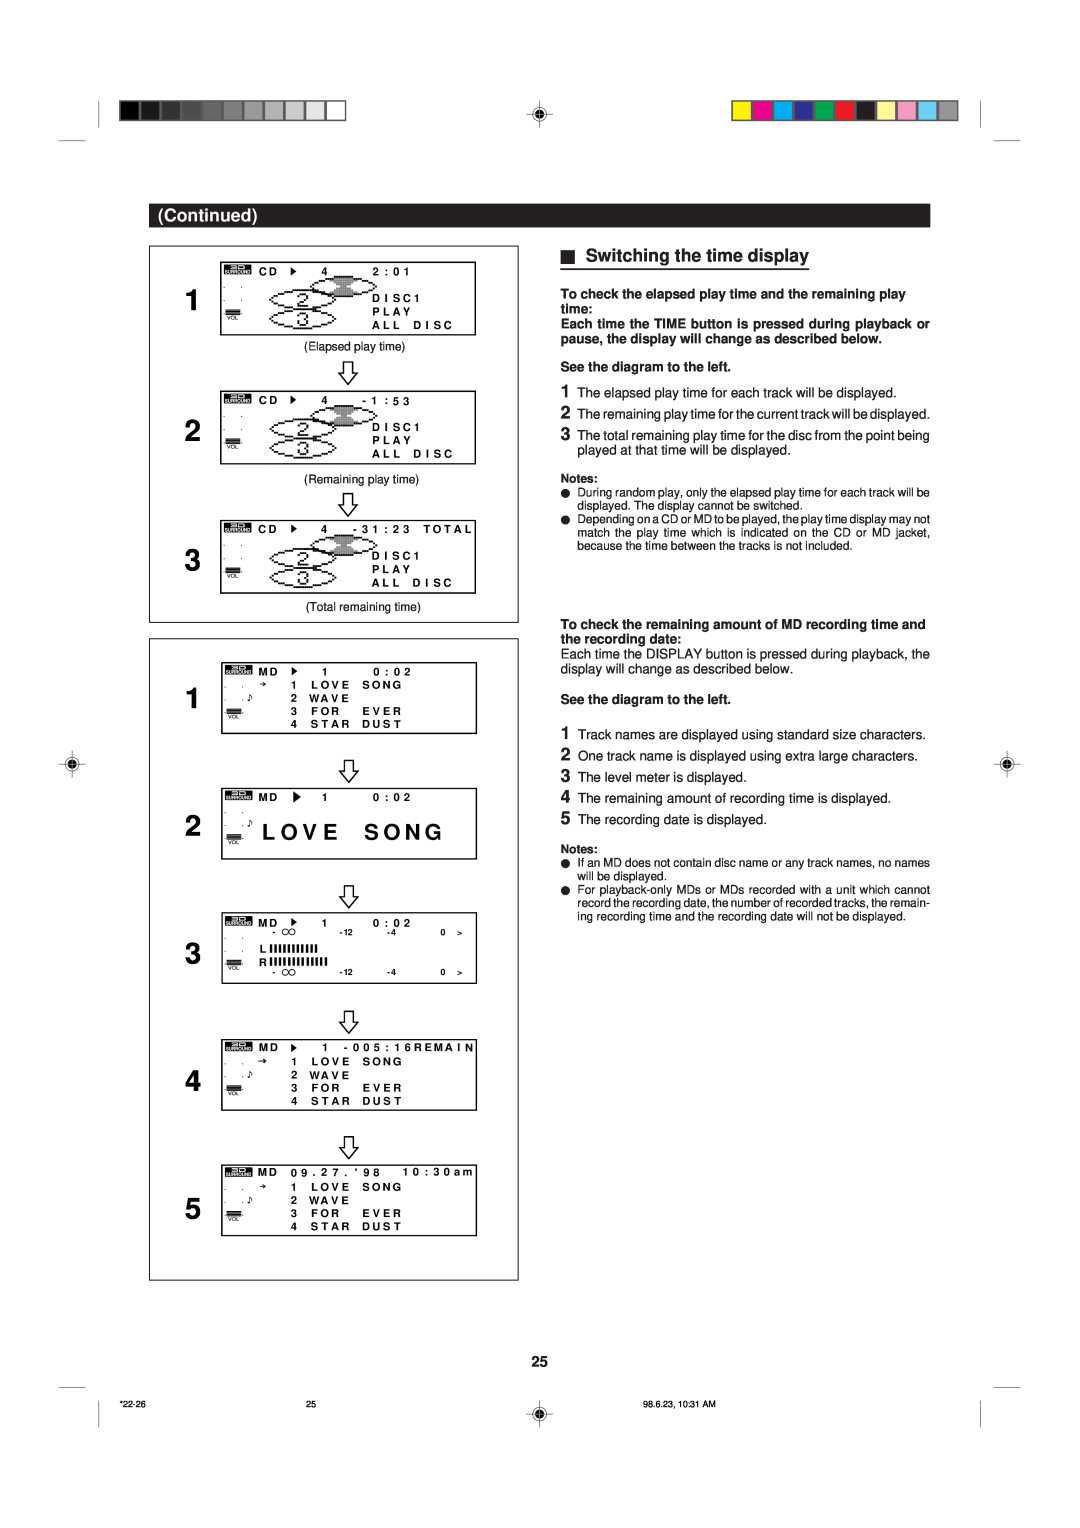 Sharp MD-X8 operation manual 2L O V E W S O N G, HSwitching the time display, Continued, See the diagram to the left 